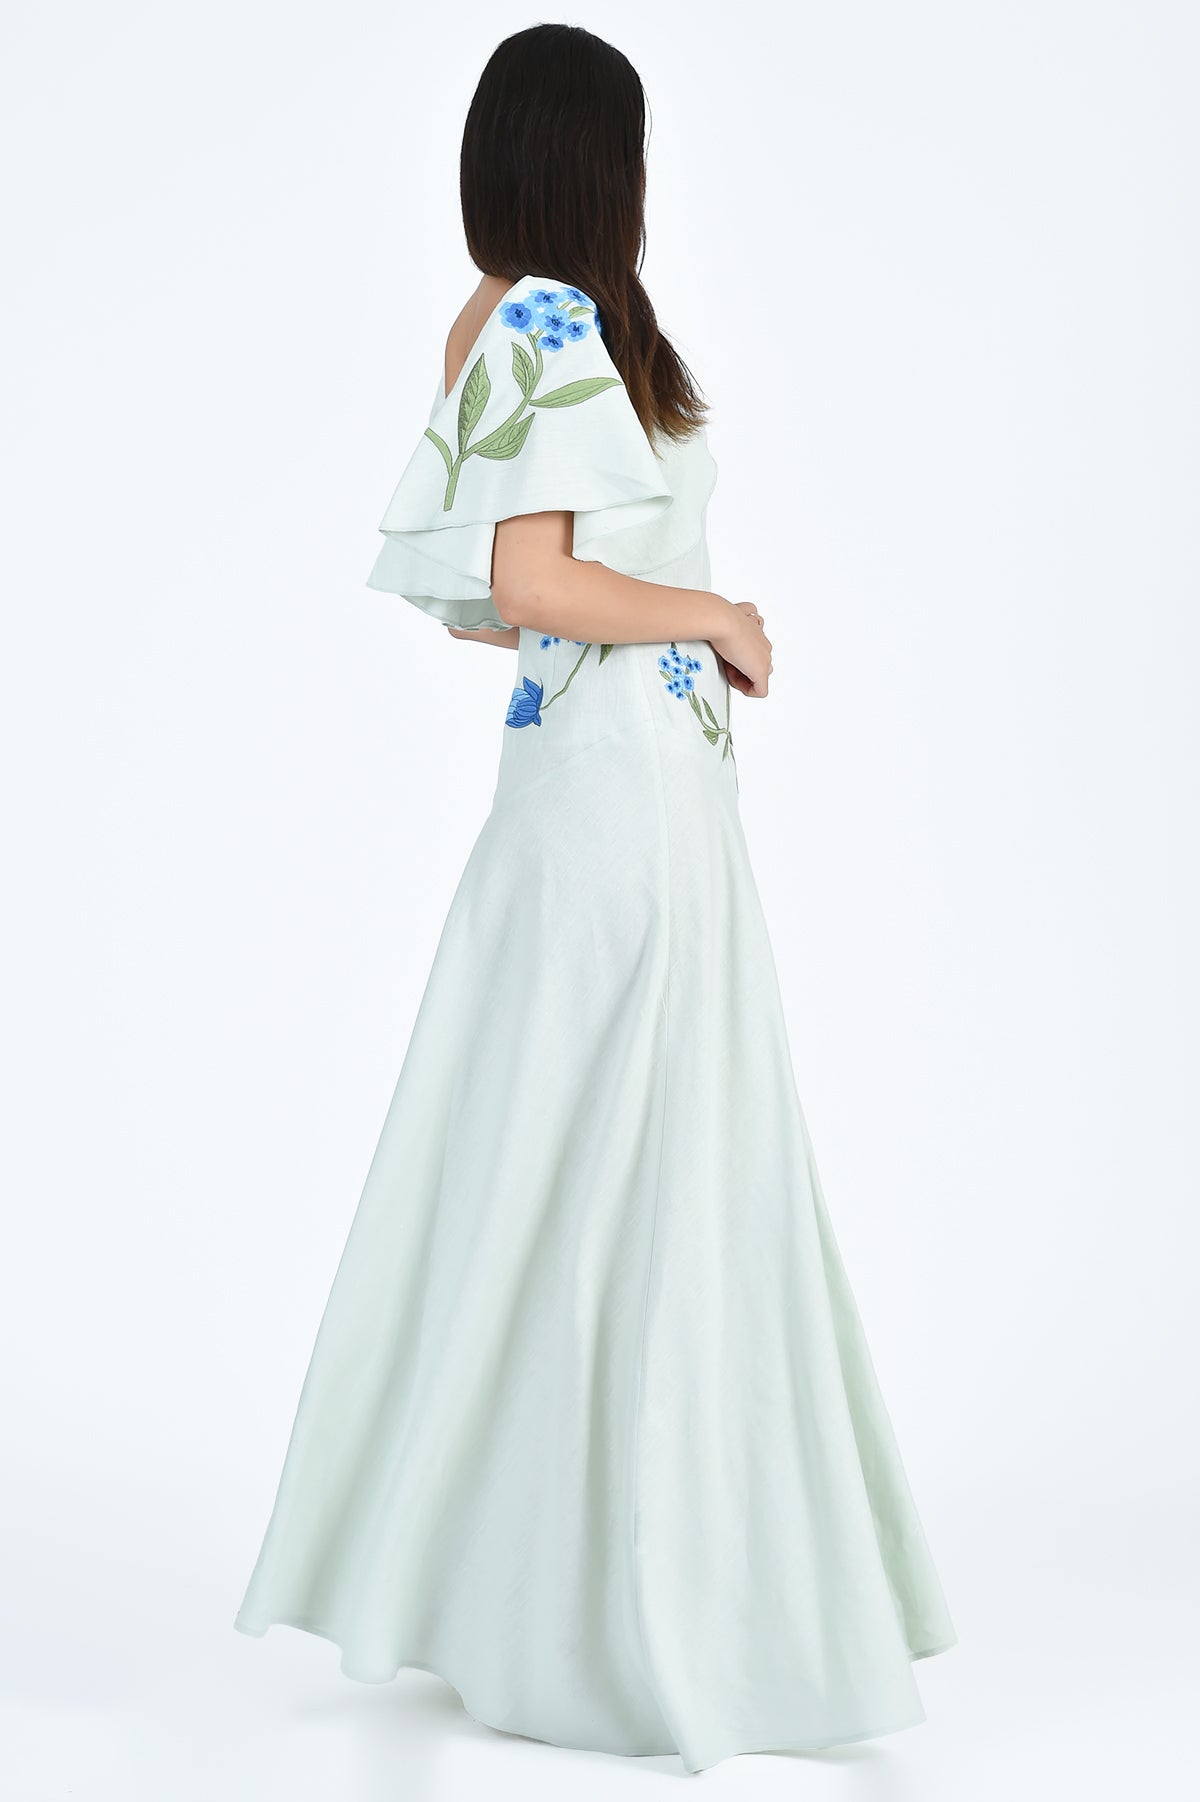 Fanm Mon Alexis Dress in Mint with Floral Embroidered Sleeve (Wombman Collection)